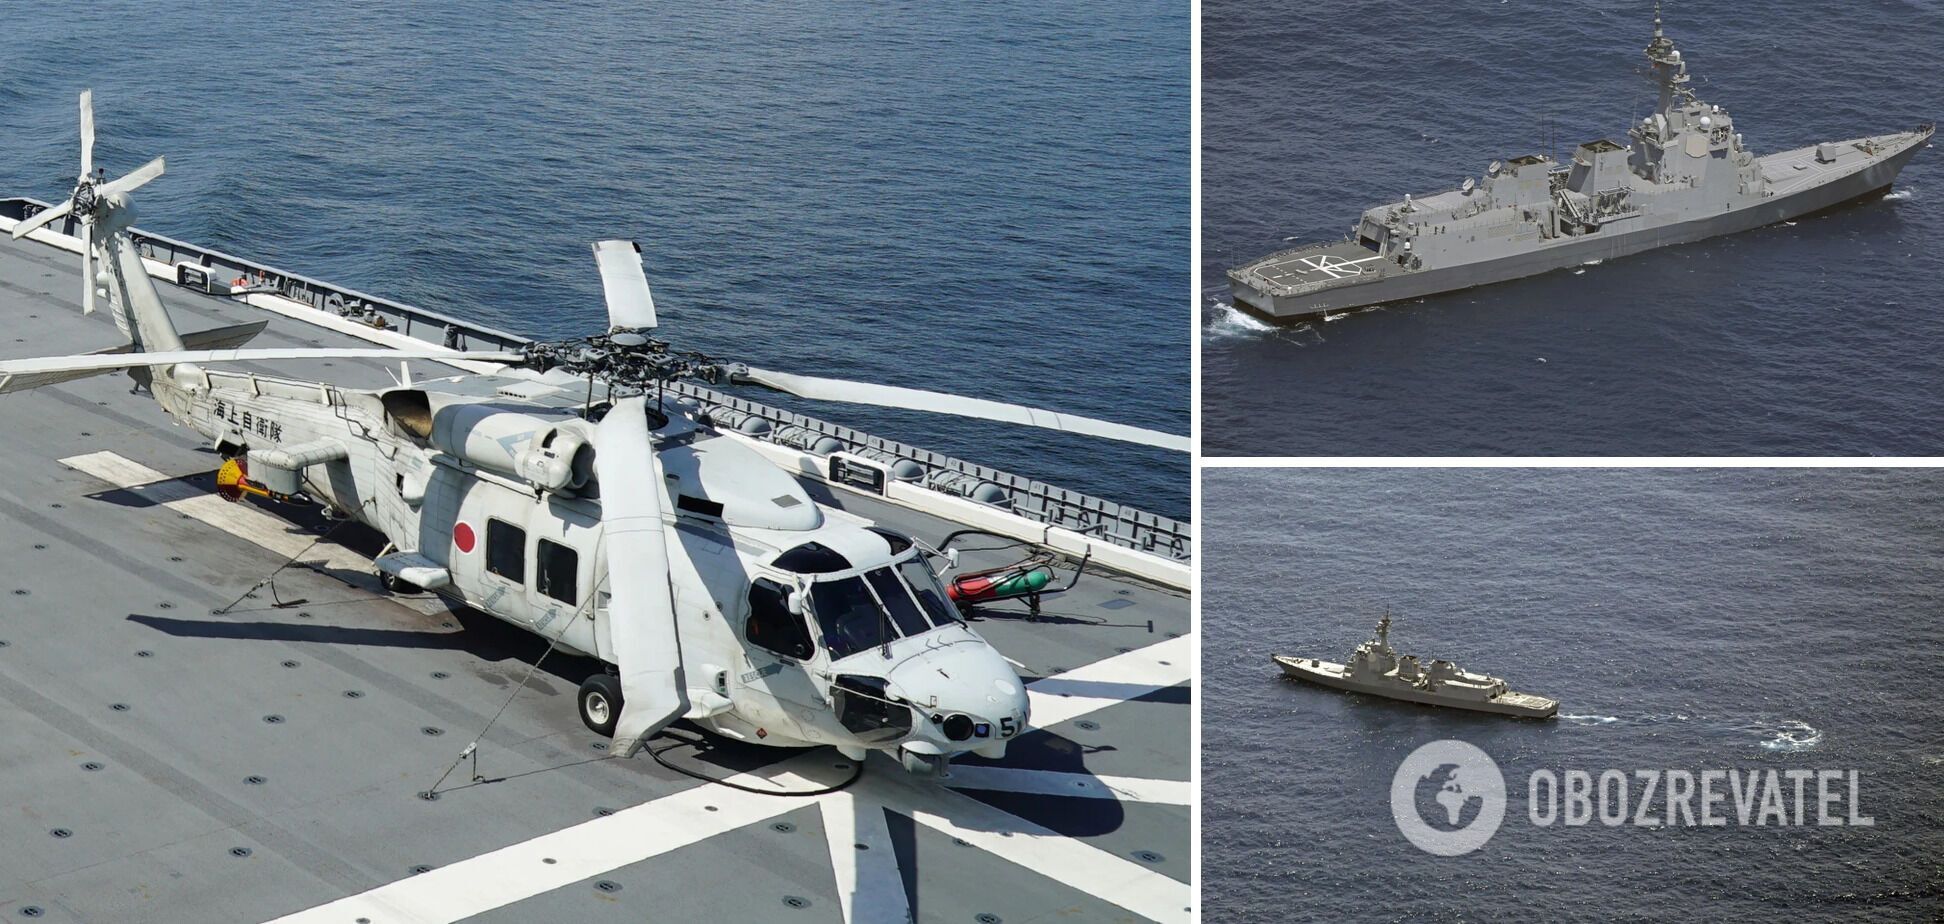 Two Japanese military helicopters crashed in the Pacific Ocean: what is known